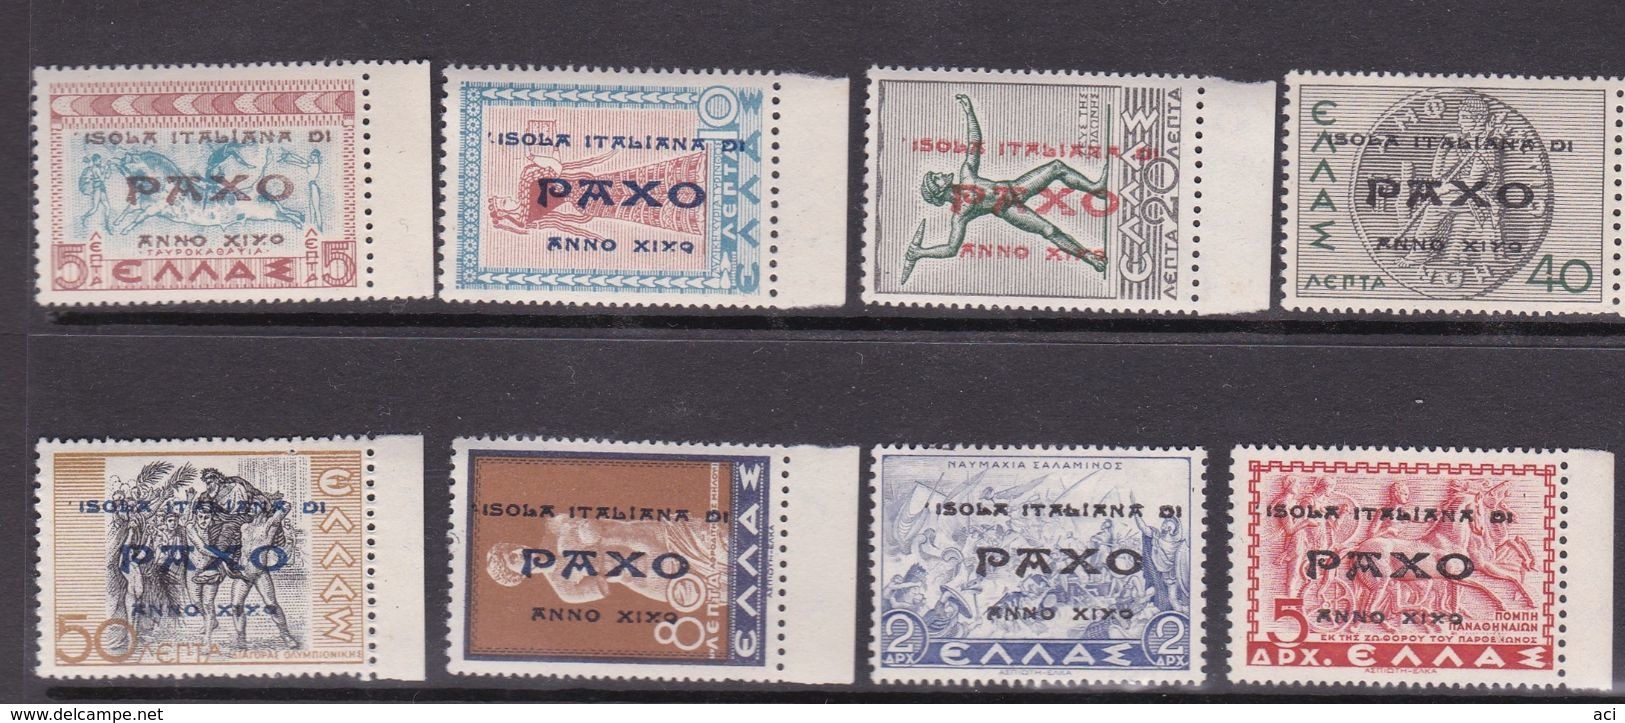 Italy-WW II Occupation-Isole Ionie, Paxos S 1-8 1942 Greek Stamps Overprinted, MNH - Ionian Islands